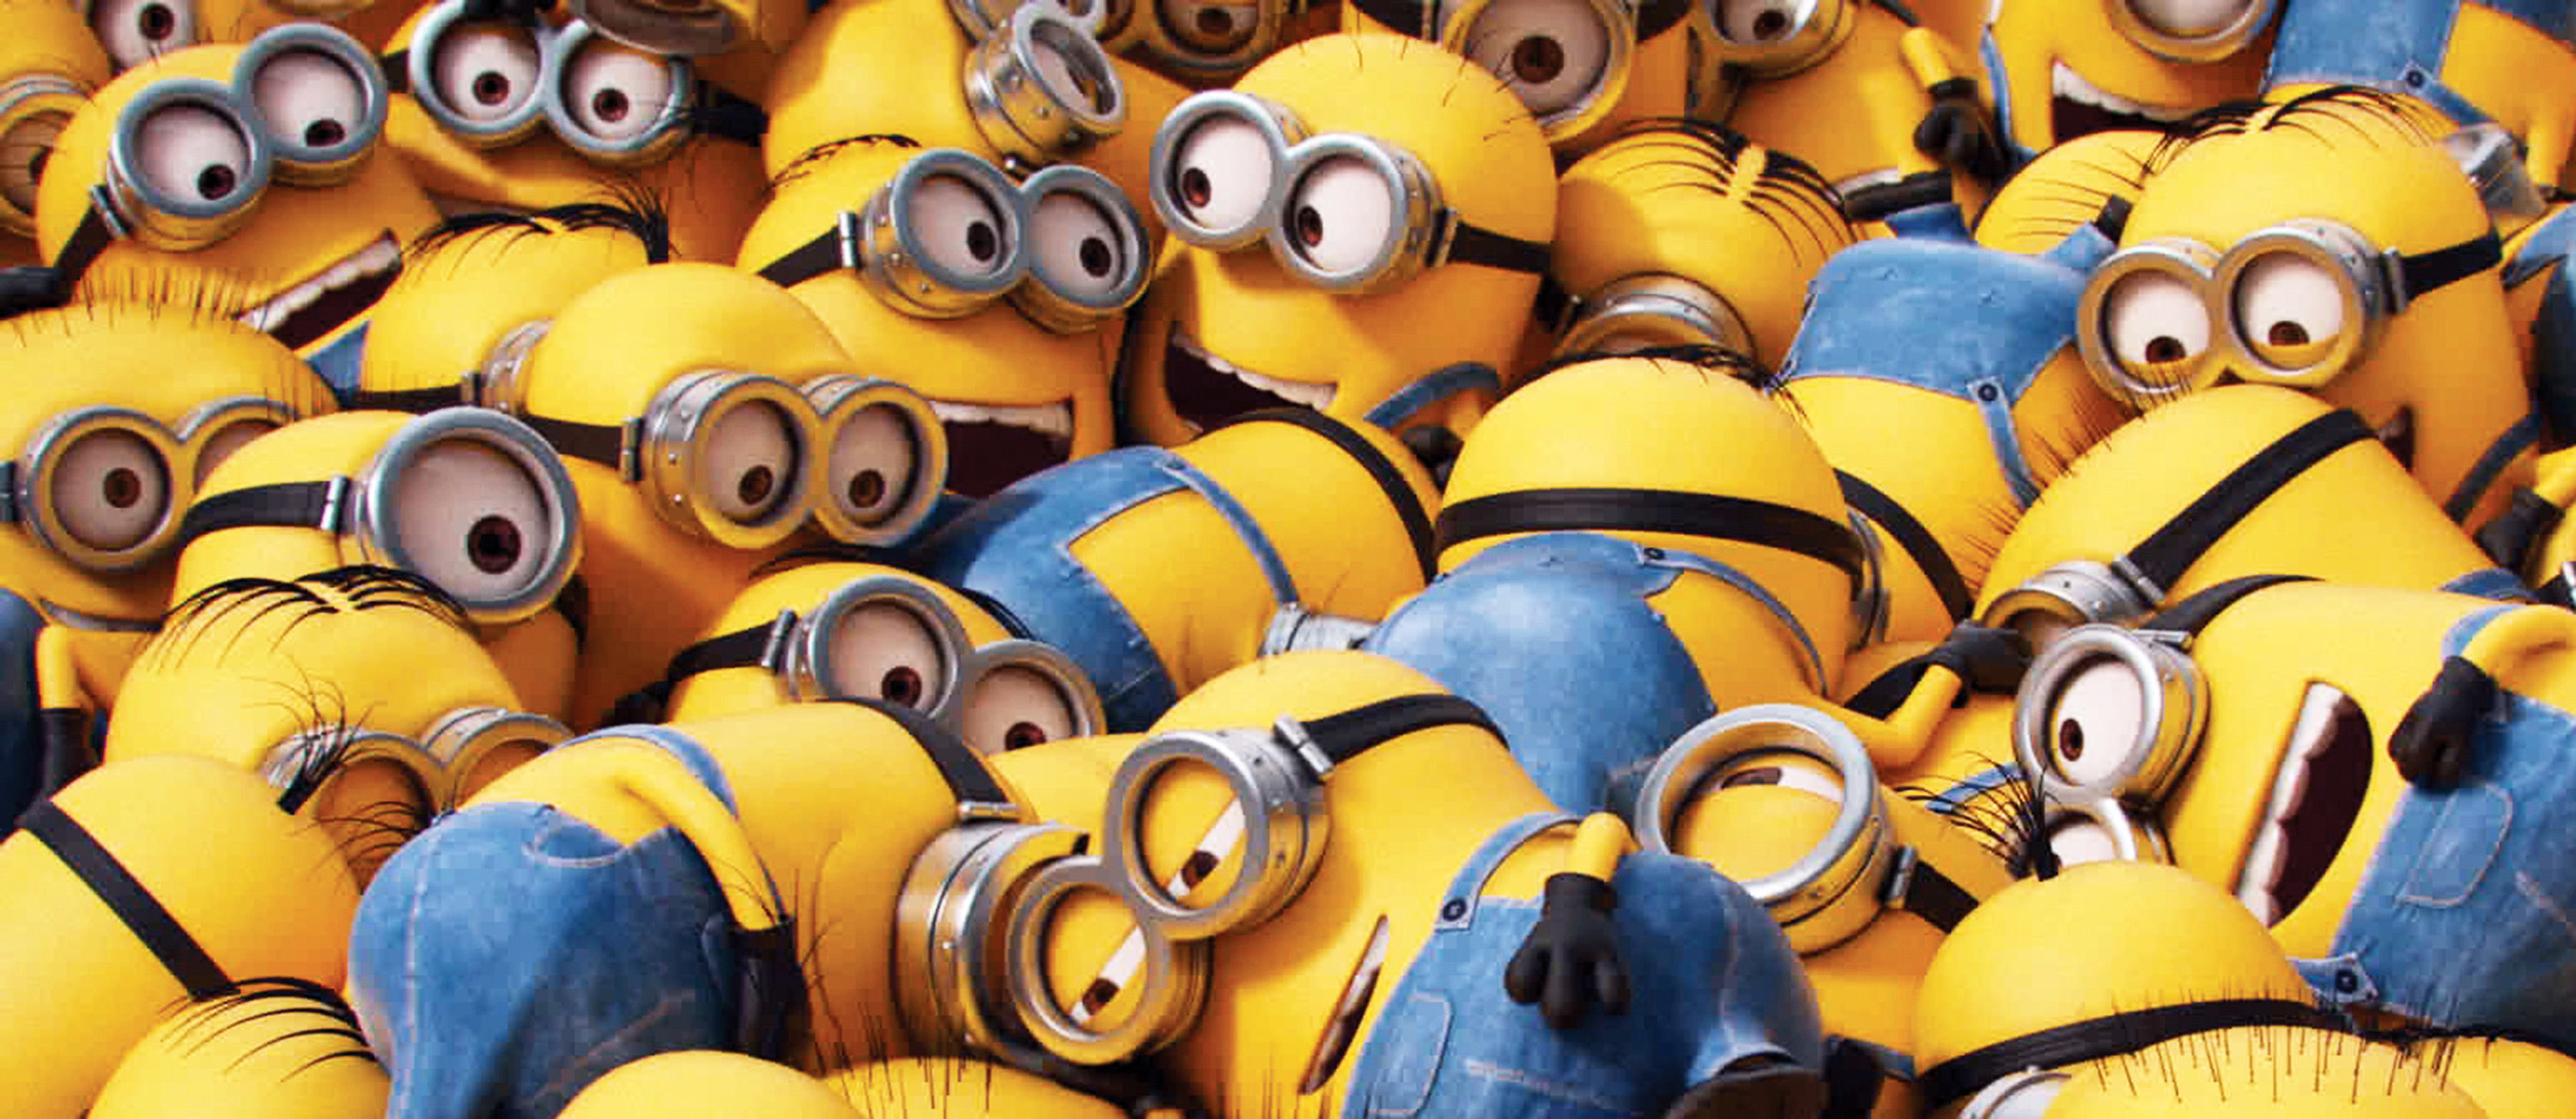 Minions piled up on each other